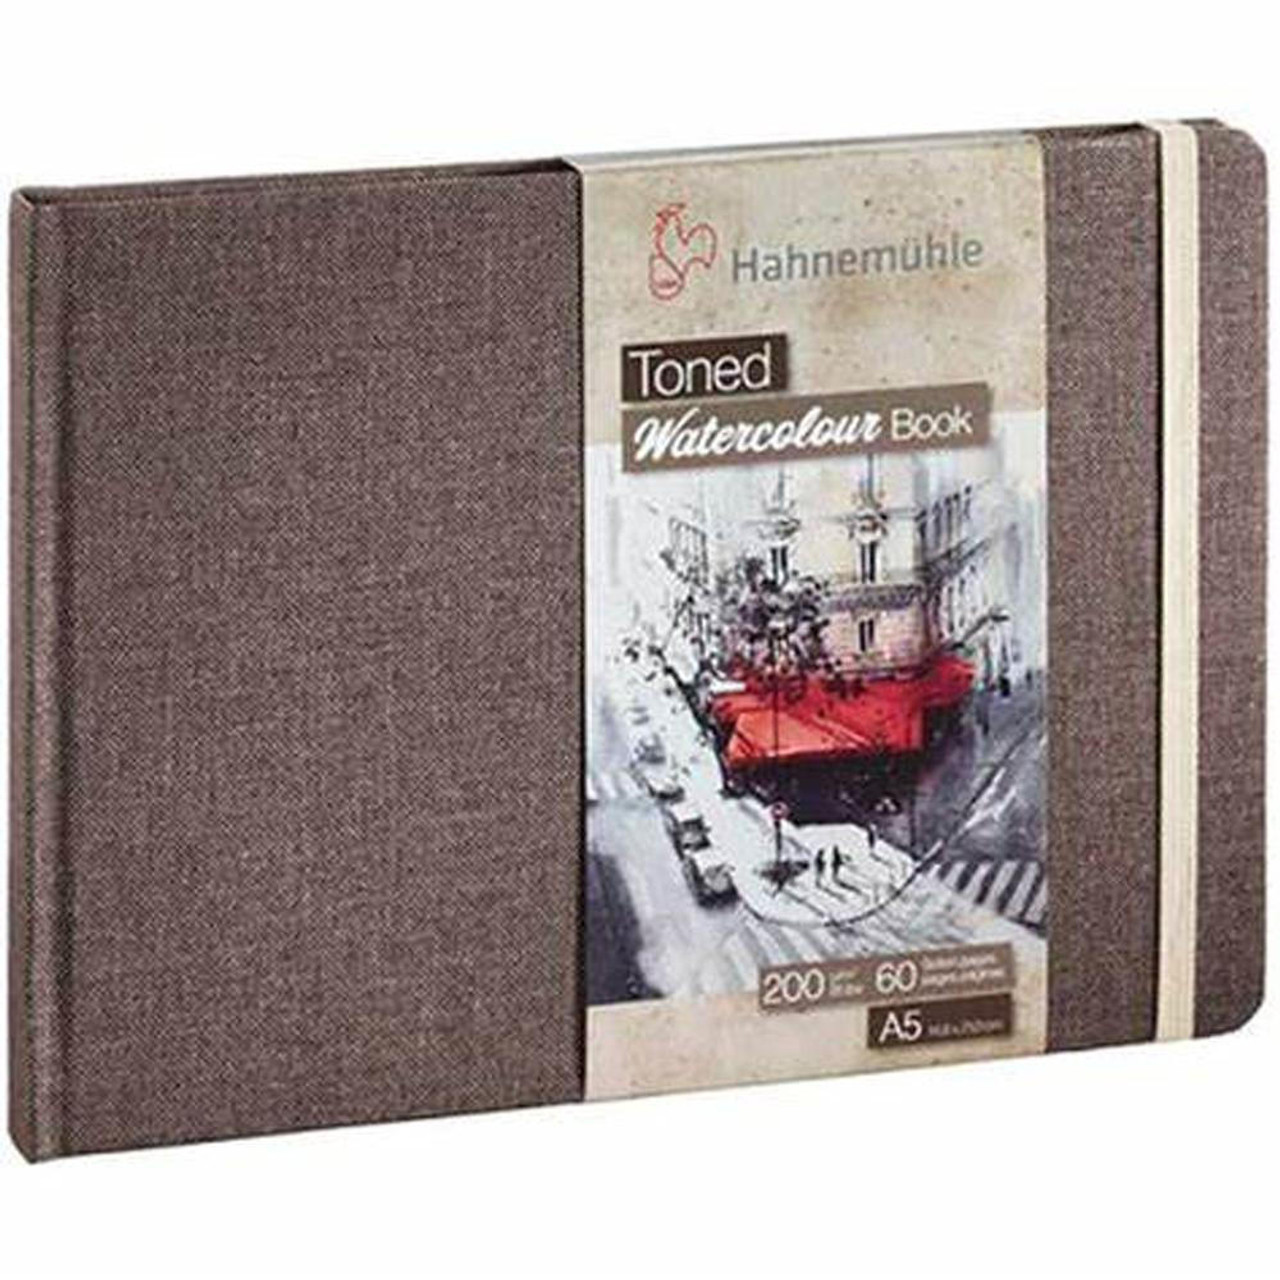 Hahnemuhle Toned Watercolor Paper Book, 30 Sheets, Landscape, A5 (5.7 x  8.25)